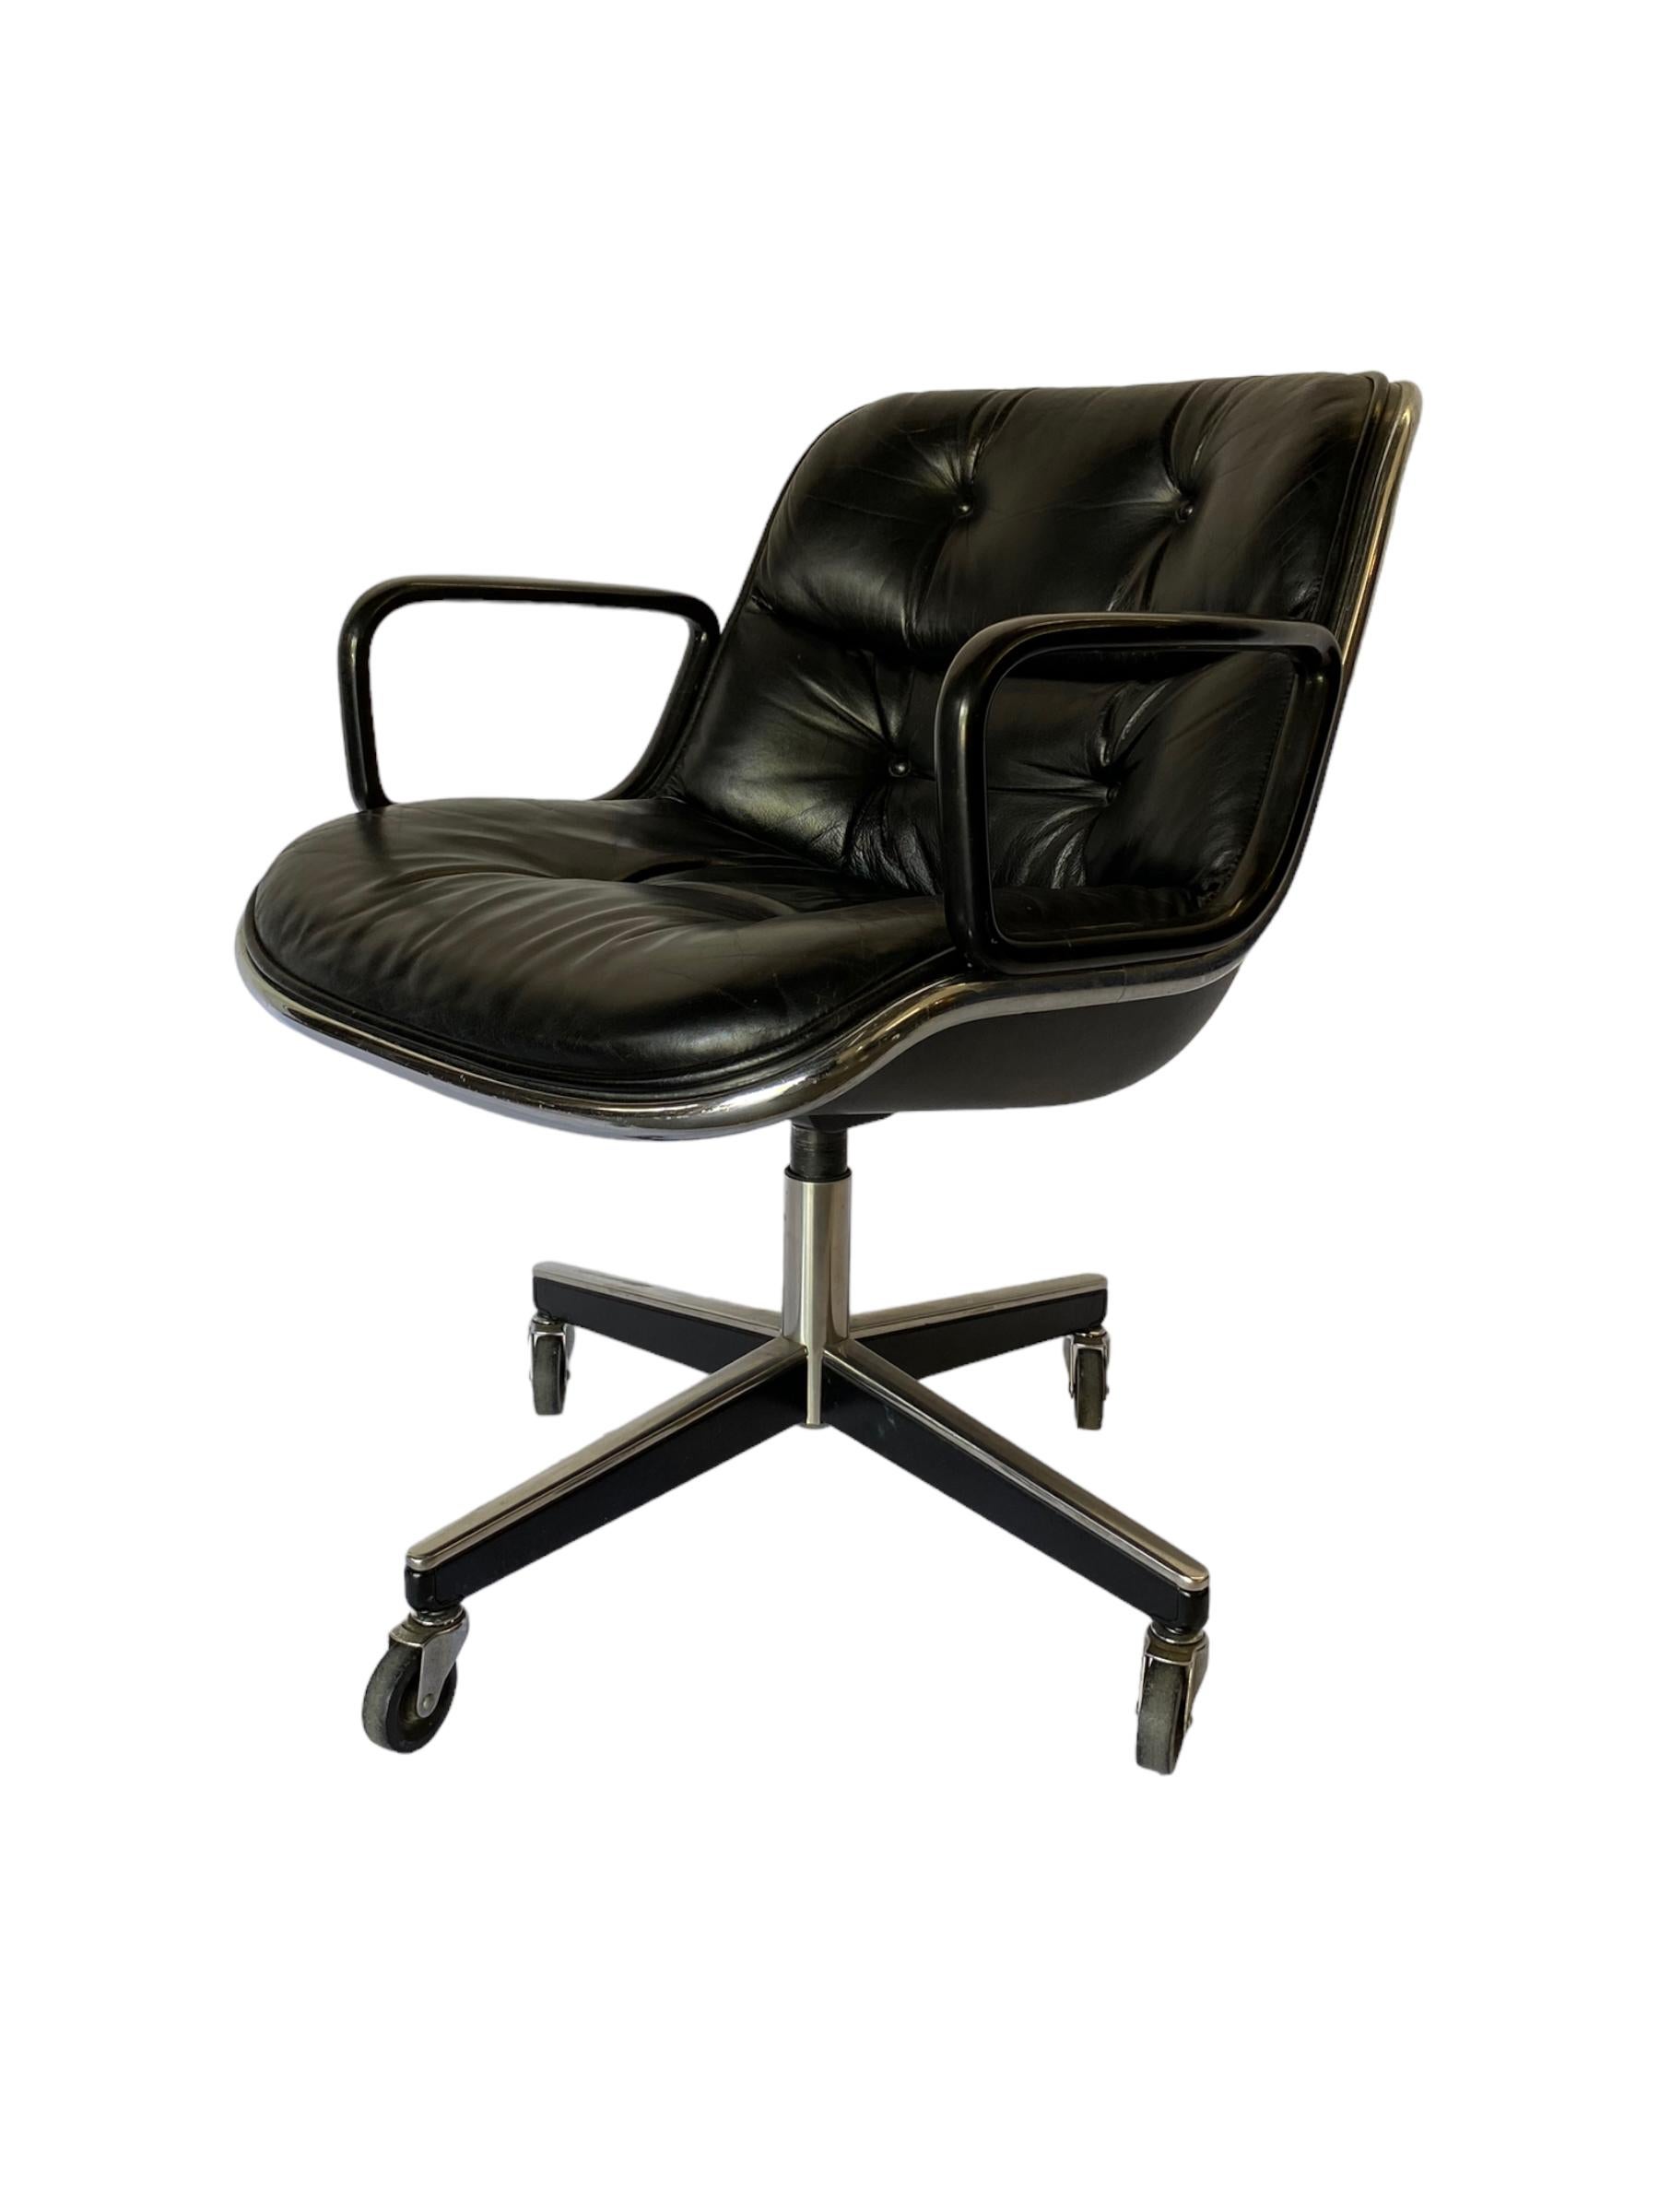 American Charles Pollock Executive Chair in Black Leather